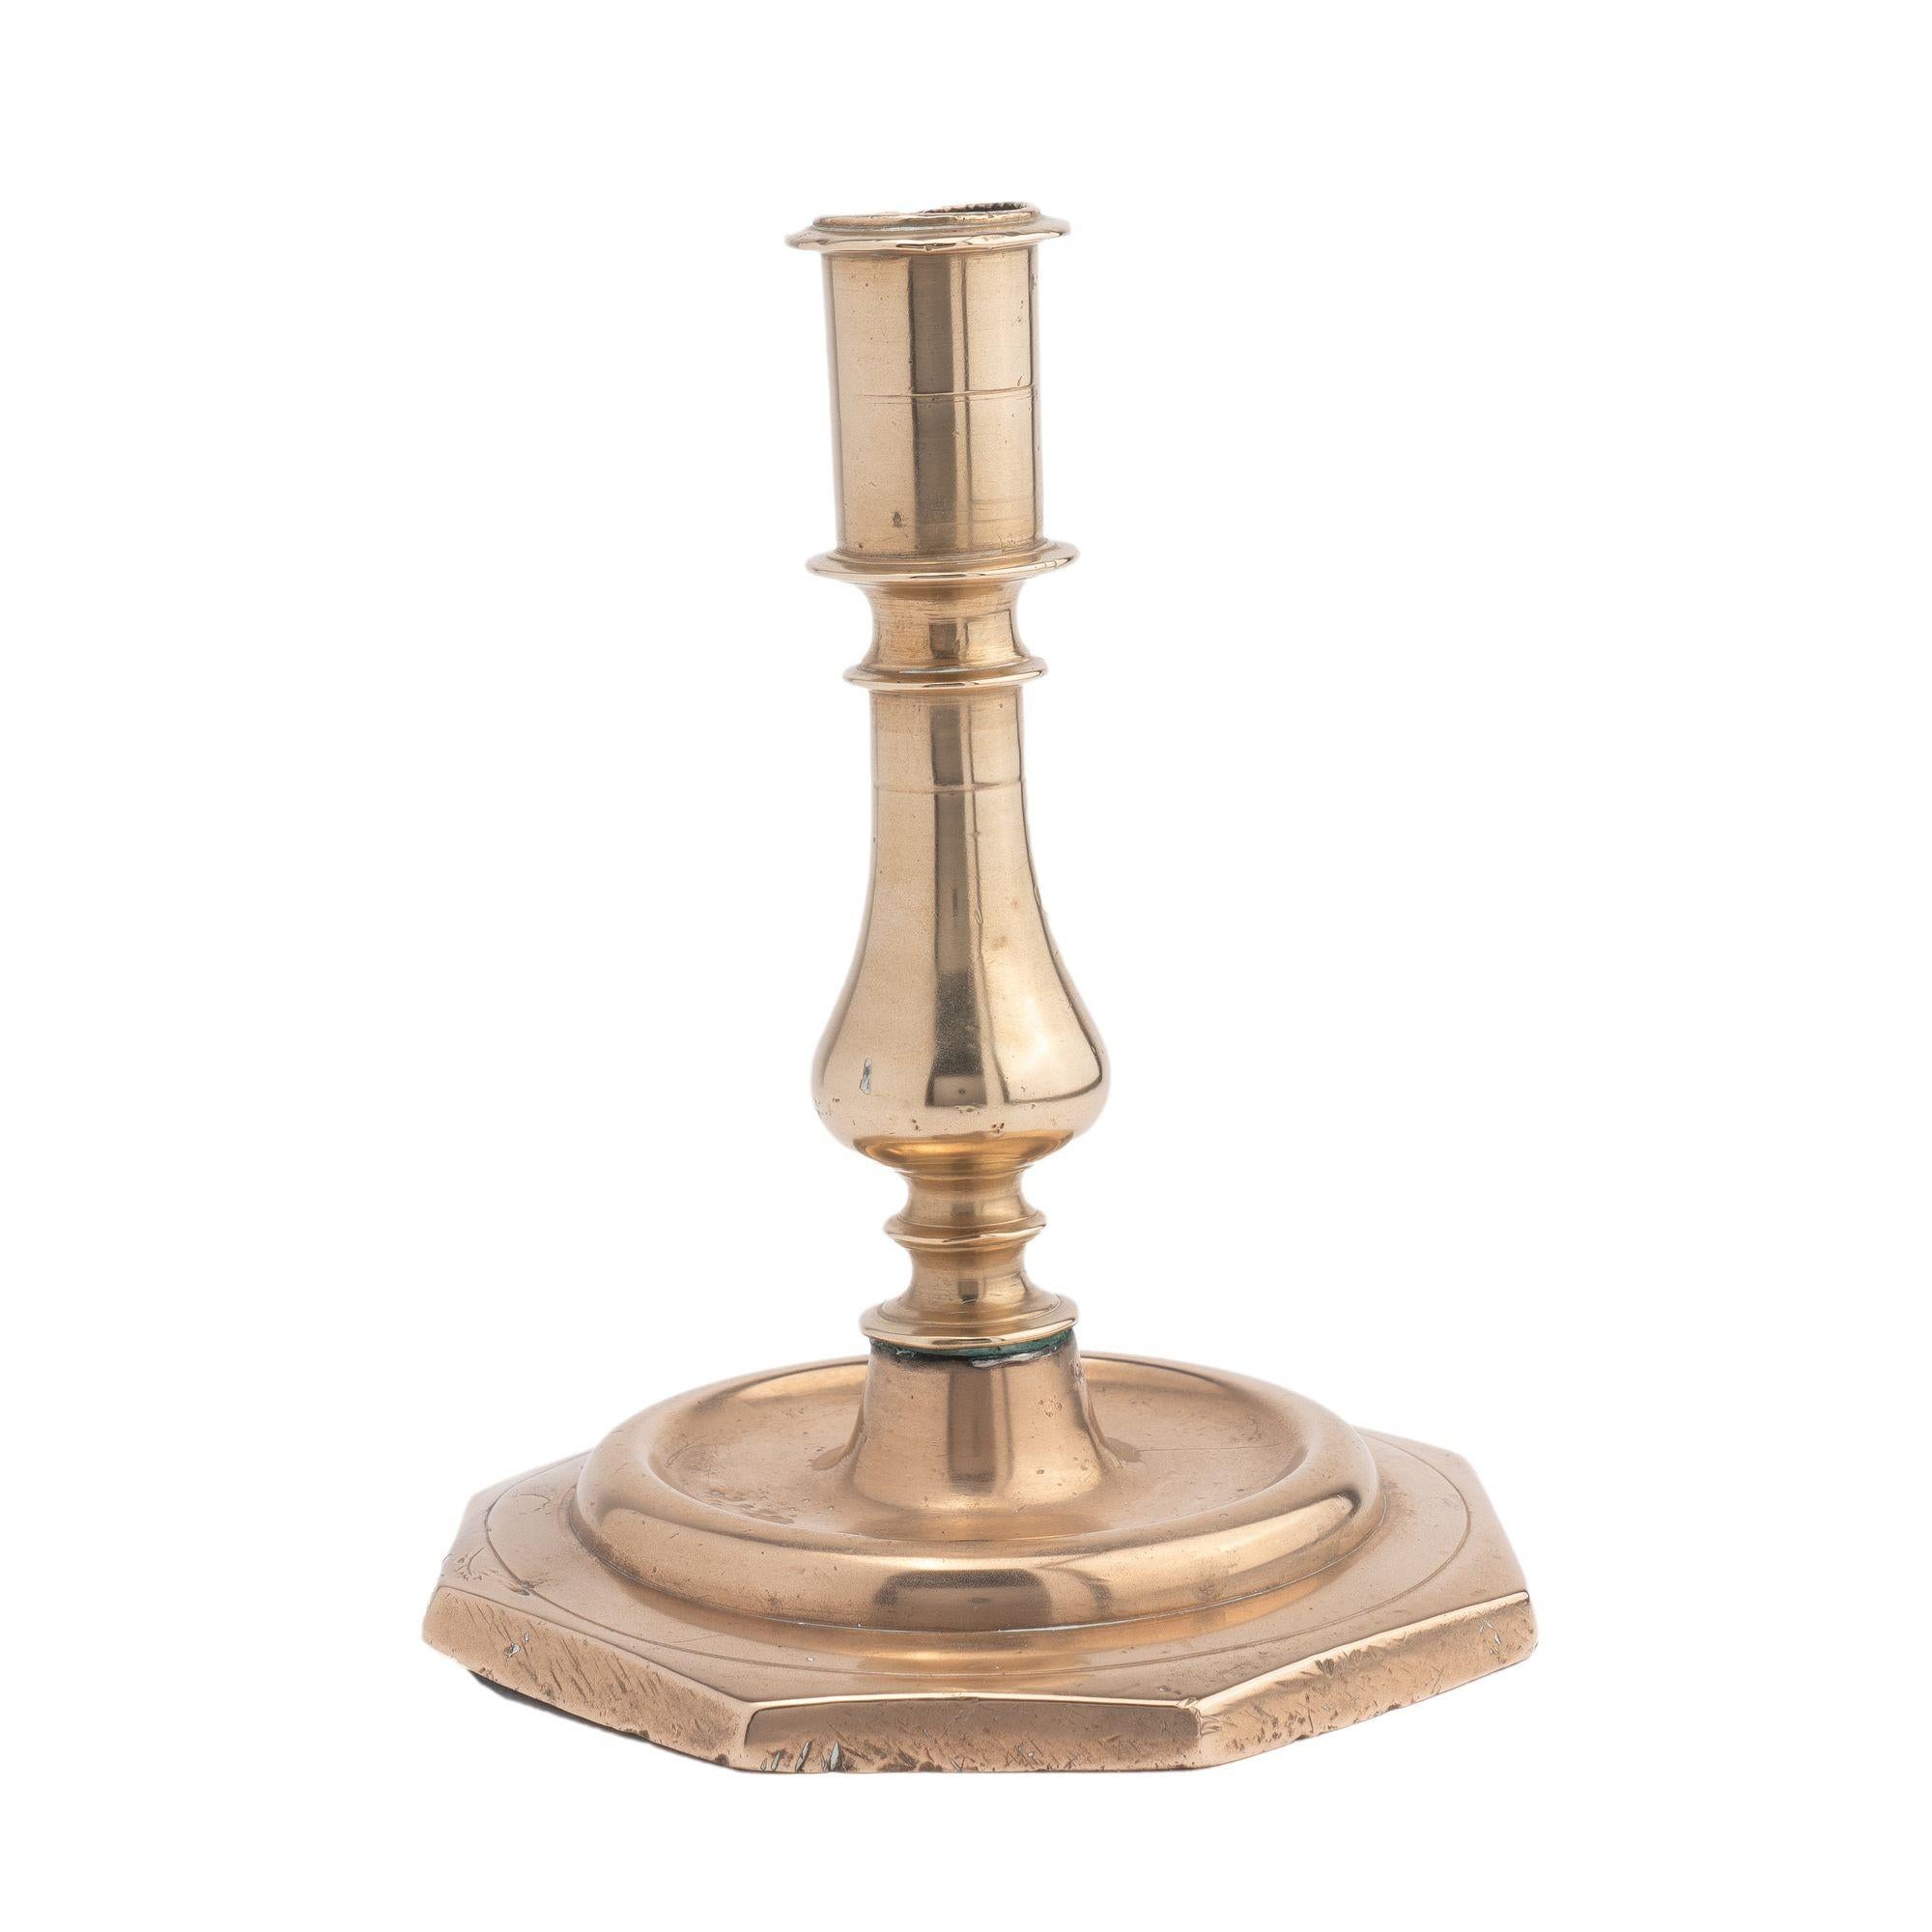 Solid cast bell metal brass candlestick with candle cup and beaded rim on a classic baluster, threaded to a circular rimmed drip pan on a raised octagonal base. The candle cup is drilled with an 'economy' boring for the removal of the candle stub.